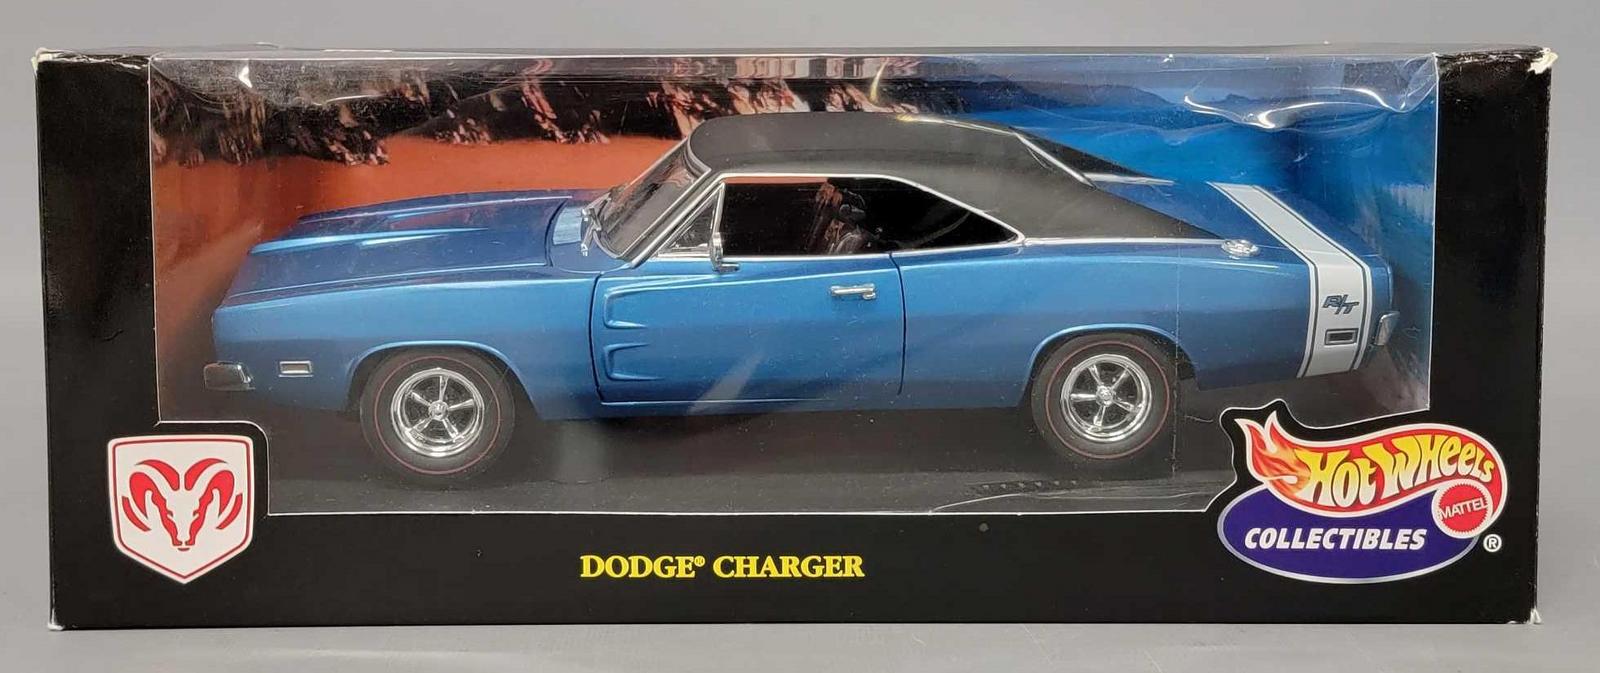 1/18 1969 DODGE CHARGER - HOTWHEELS COLLECTIBLES